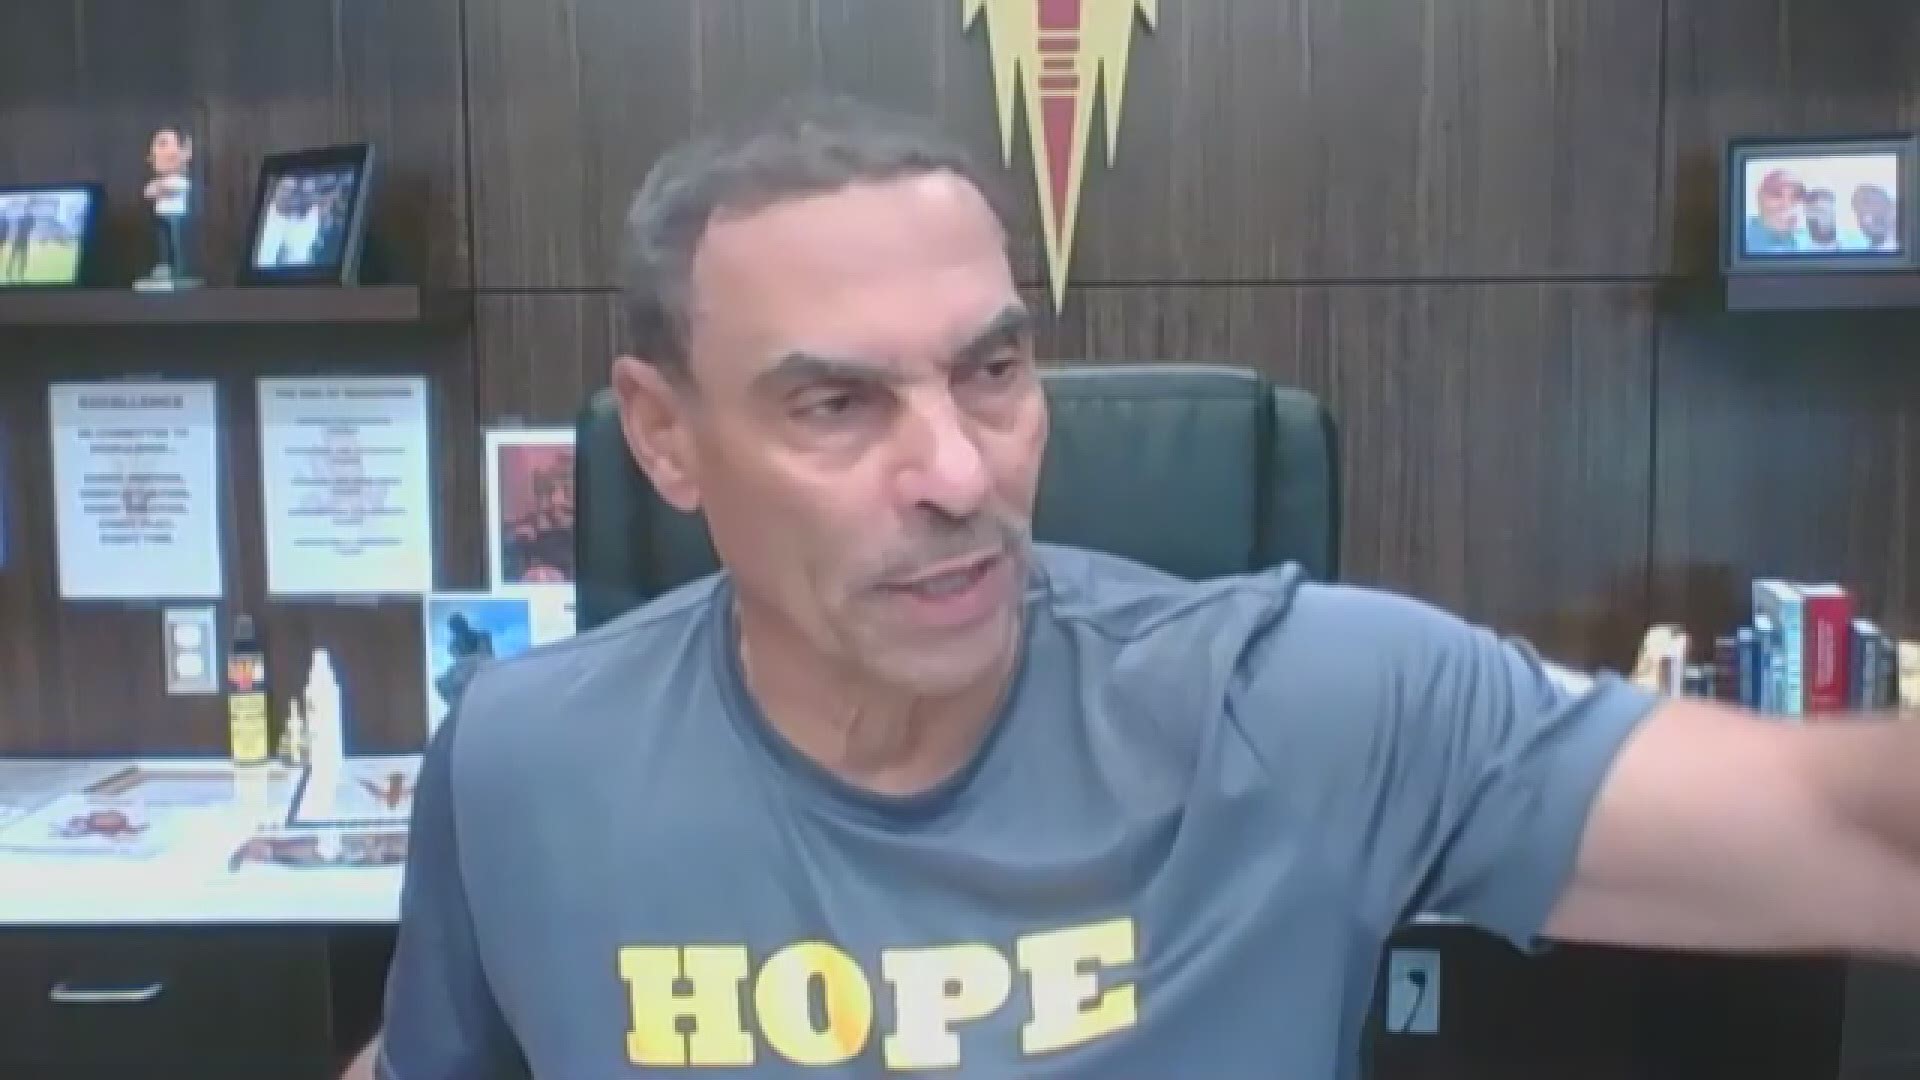 The tragic events of Sept. 11, 2001, led ASU football coach Herm Edwards to the best moment in his coaching career.